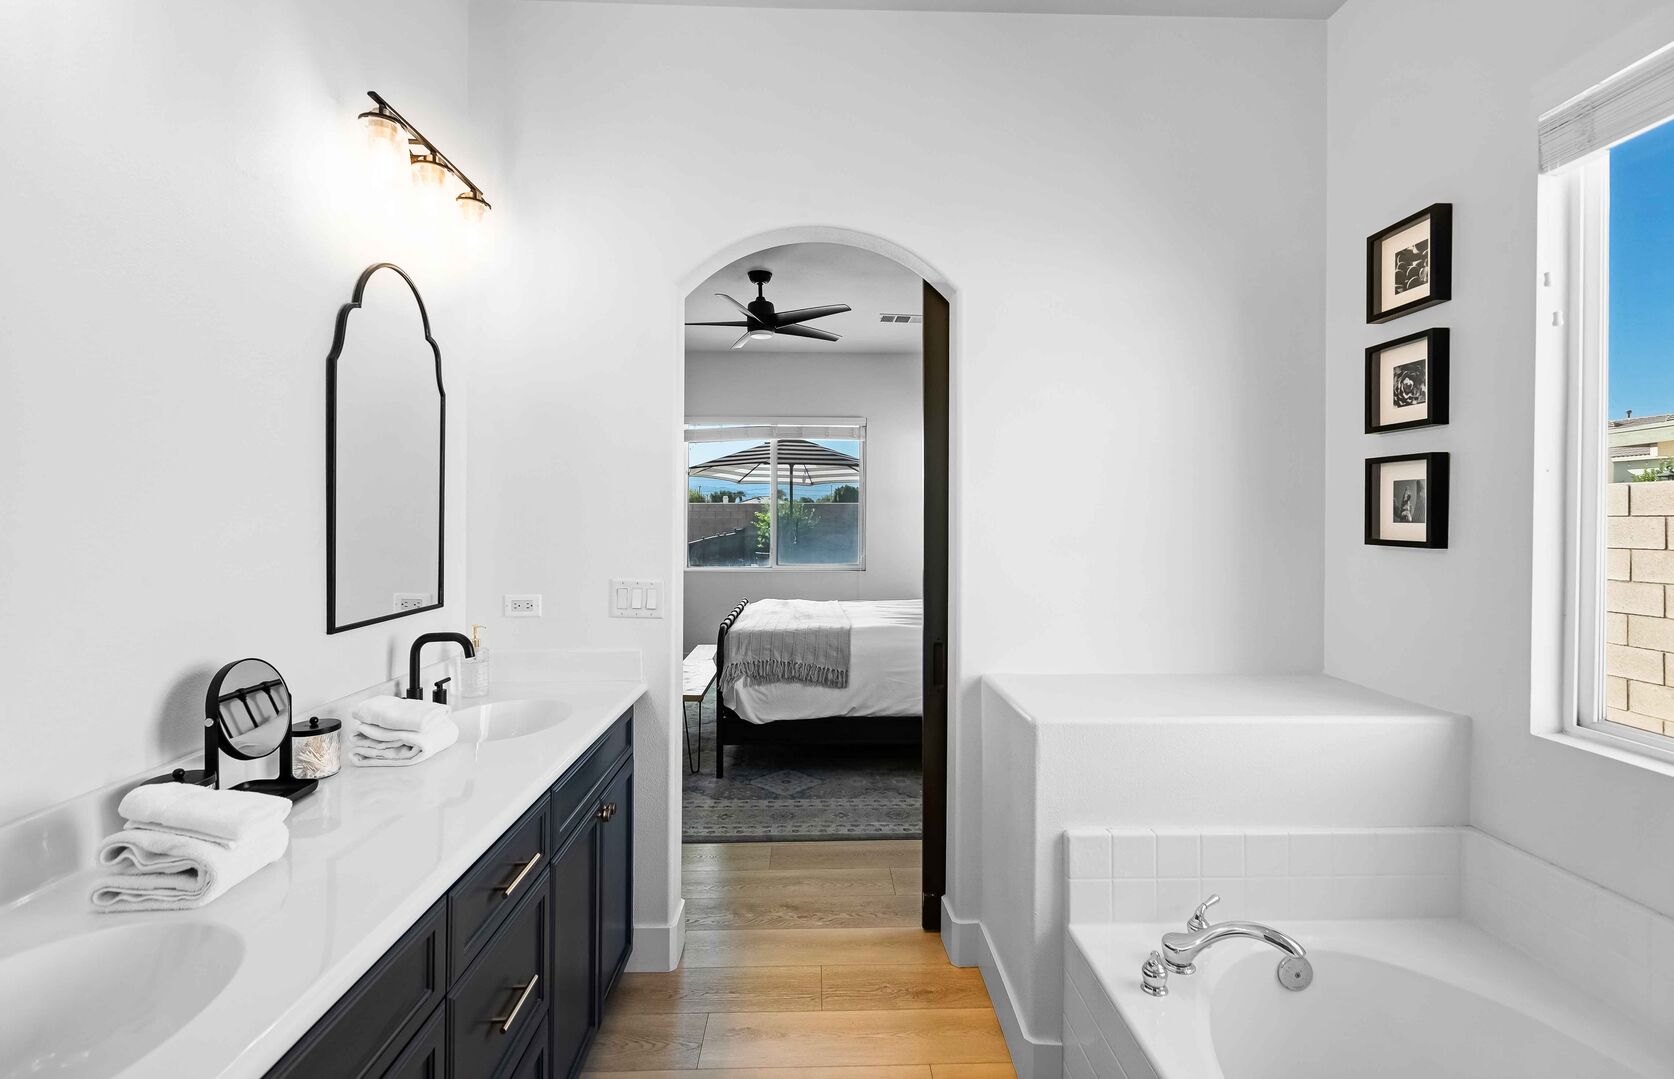 With access to your own private en suite bathroom, this room is built for relaxation.